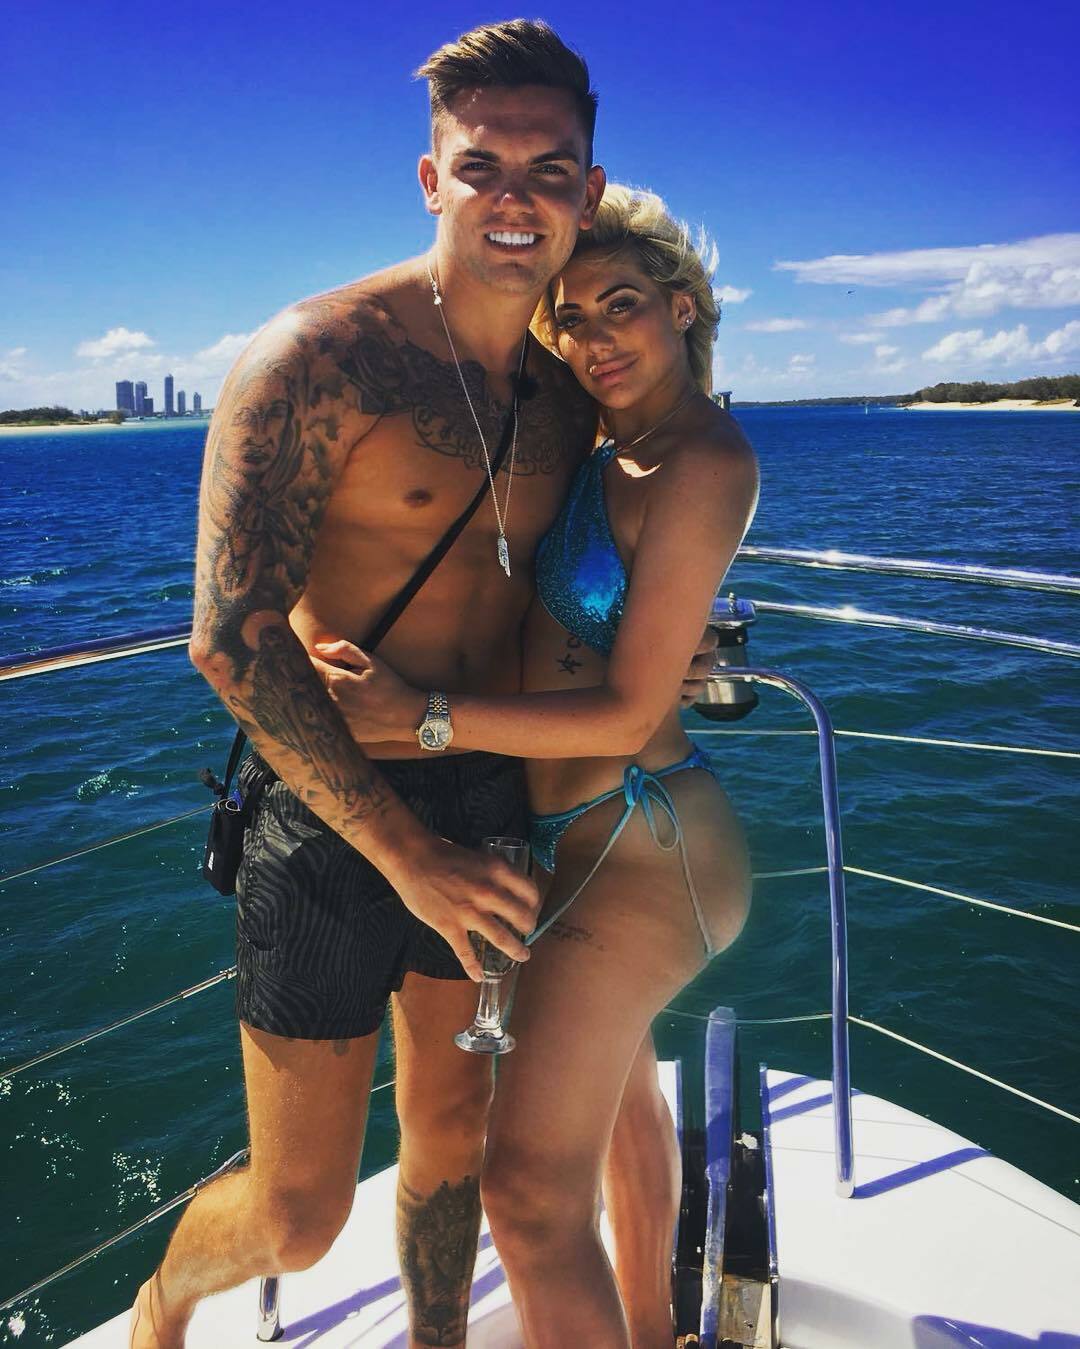 Fans Accused Sam Gowland And Chloe Ferry Of Photoshopping Chloe’s Body In This Holiday Picture